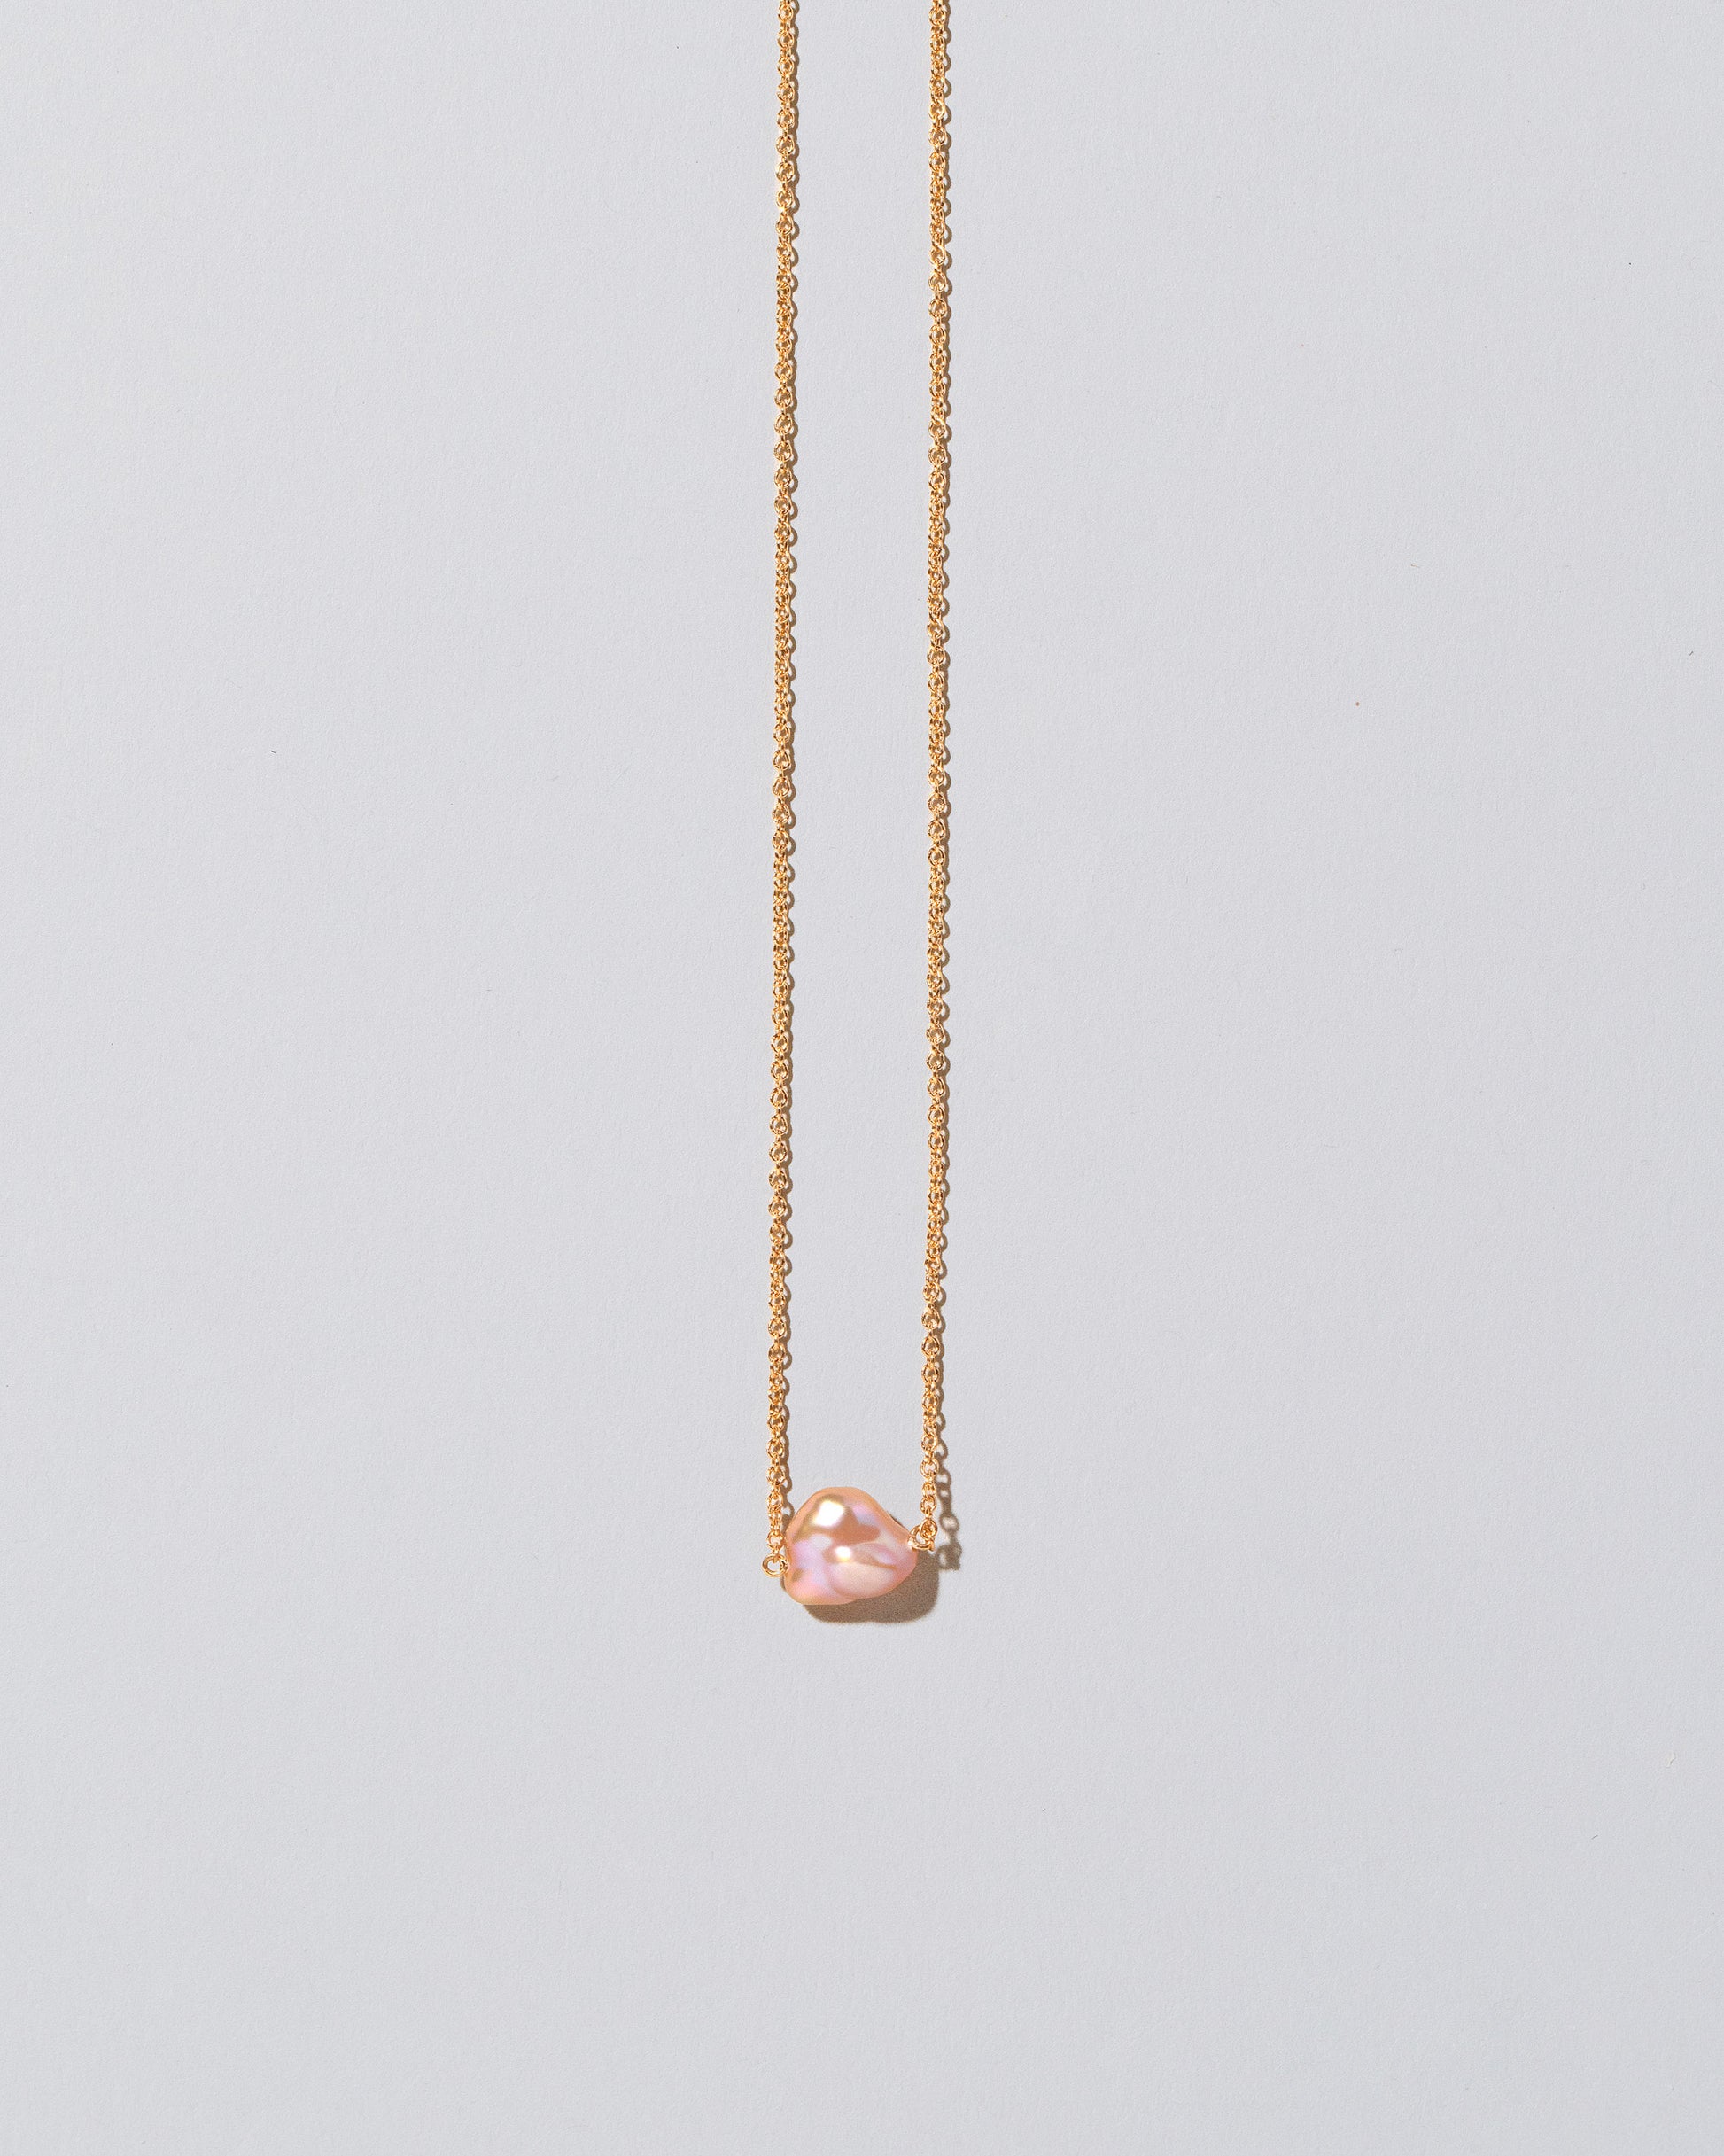 Lagniappe Pearl Necklace Pink #4 on light color background.